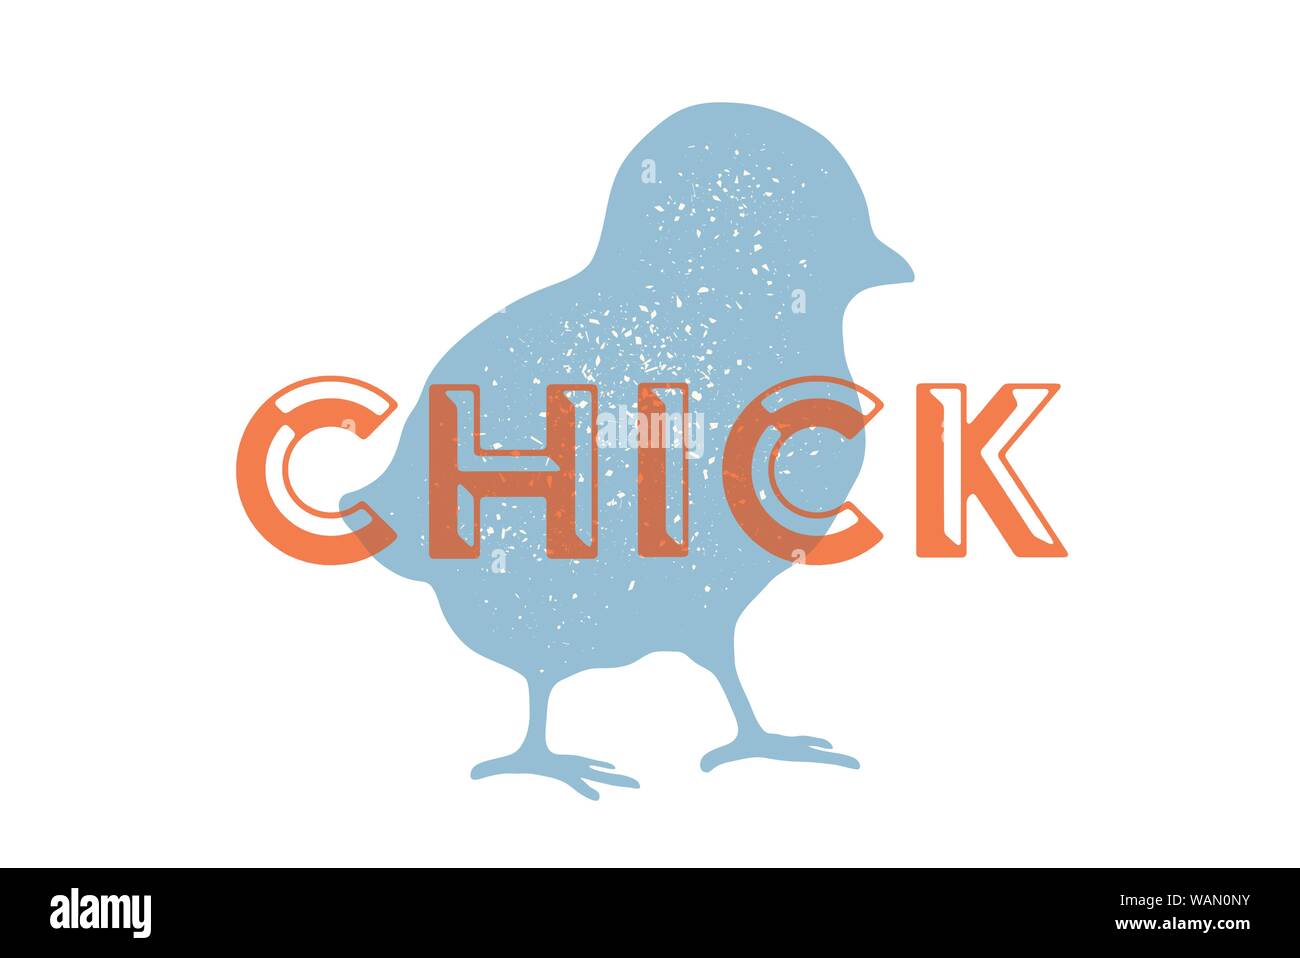 Chick, poultry. Vintage logo, retro print, poster for Butchery Stock Vector